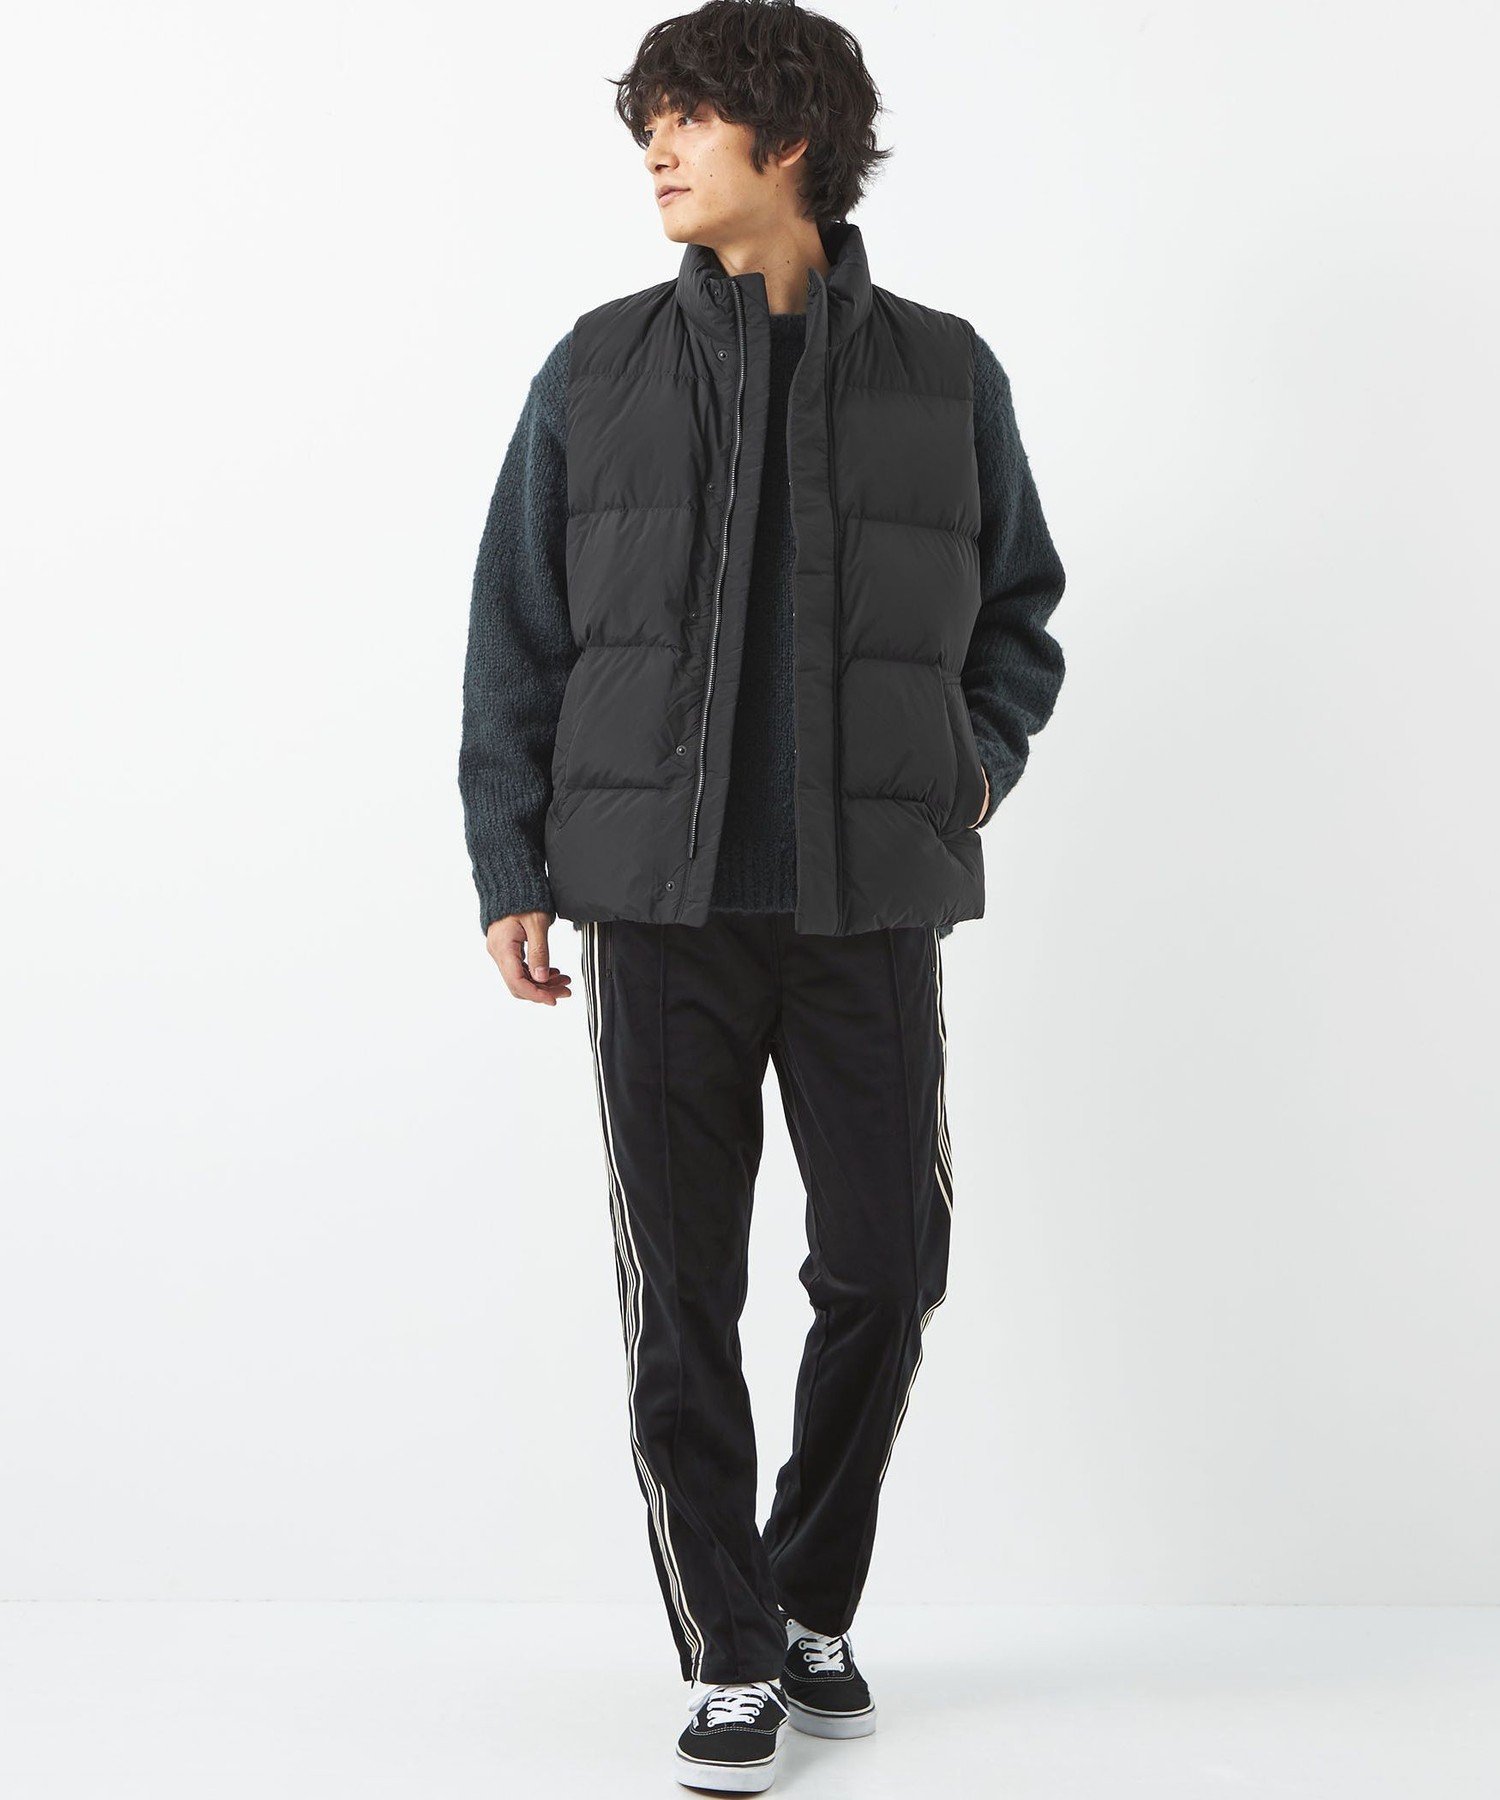 UNITED ARROWS green label relaxing｜DICROS ダウンベスト